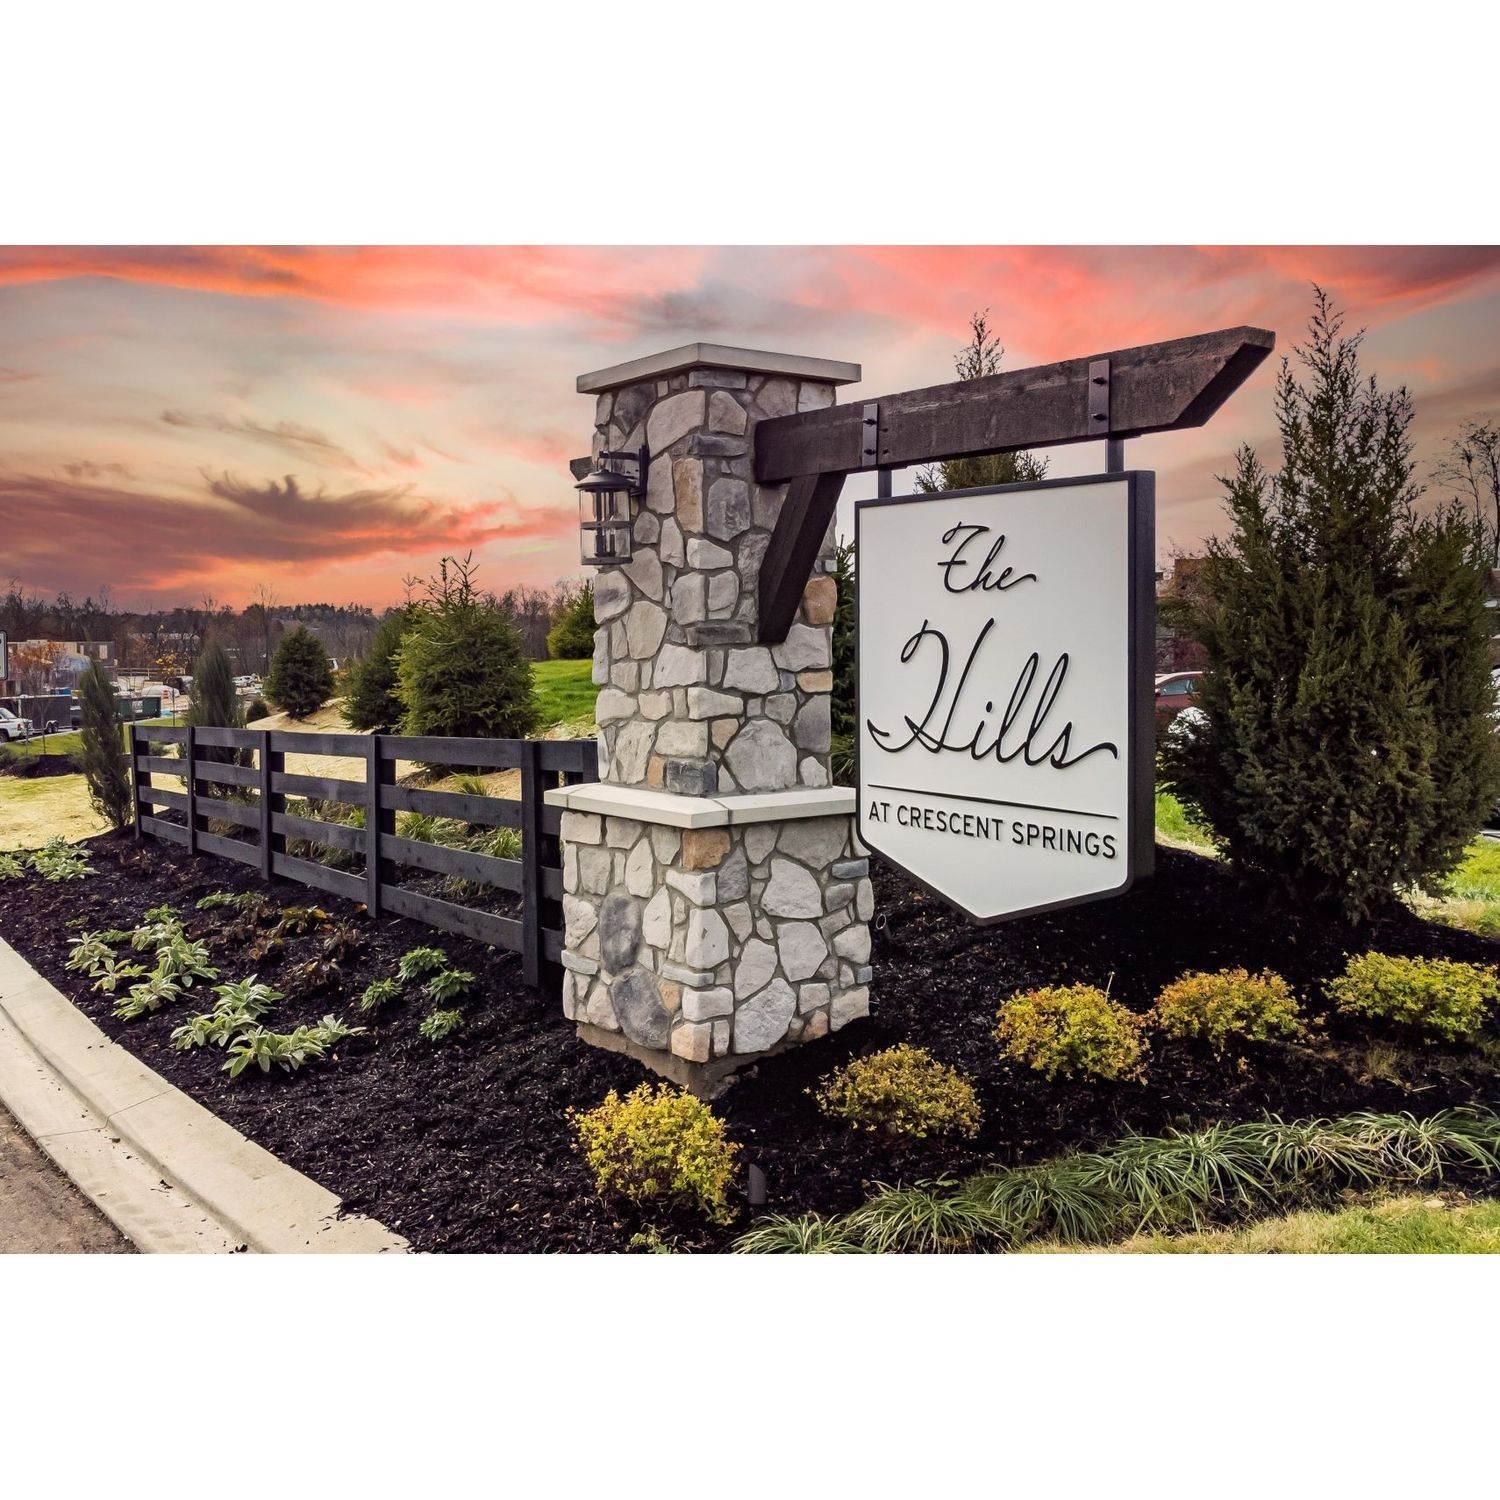 14. The Hills at Crescent Springs bâtiment à 2301 Woodhill Court, Crescent Springs, KY 41017